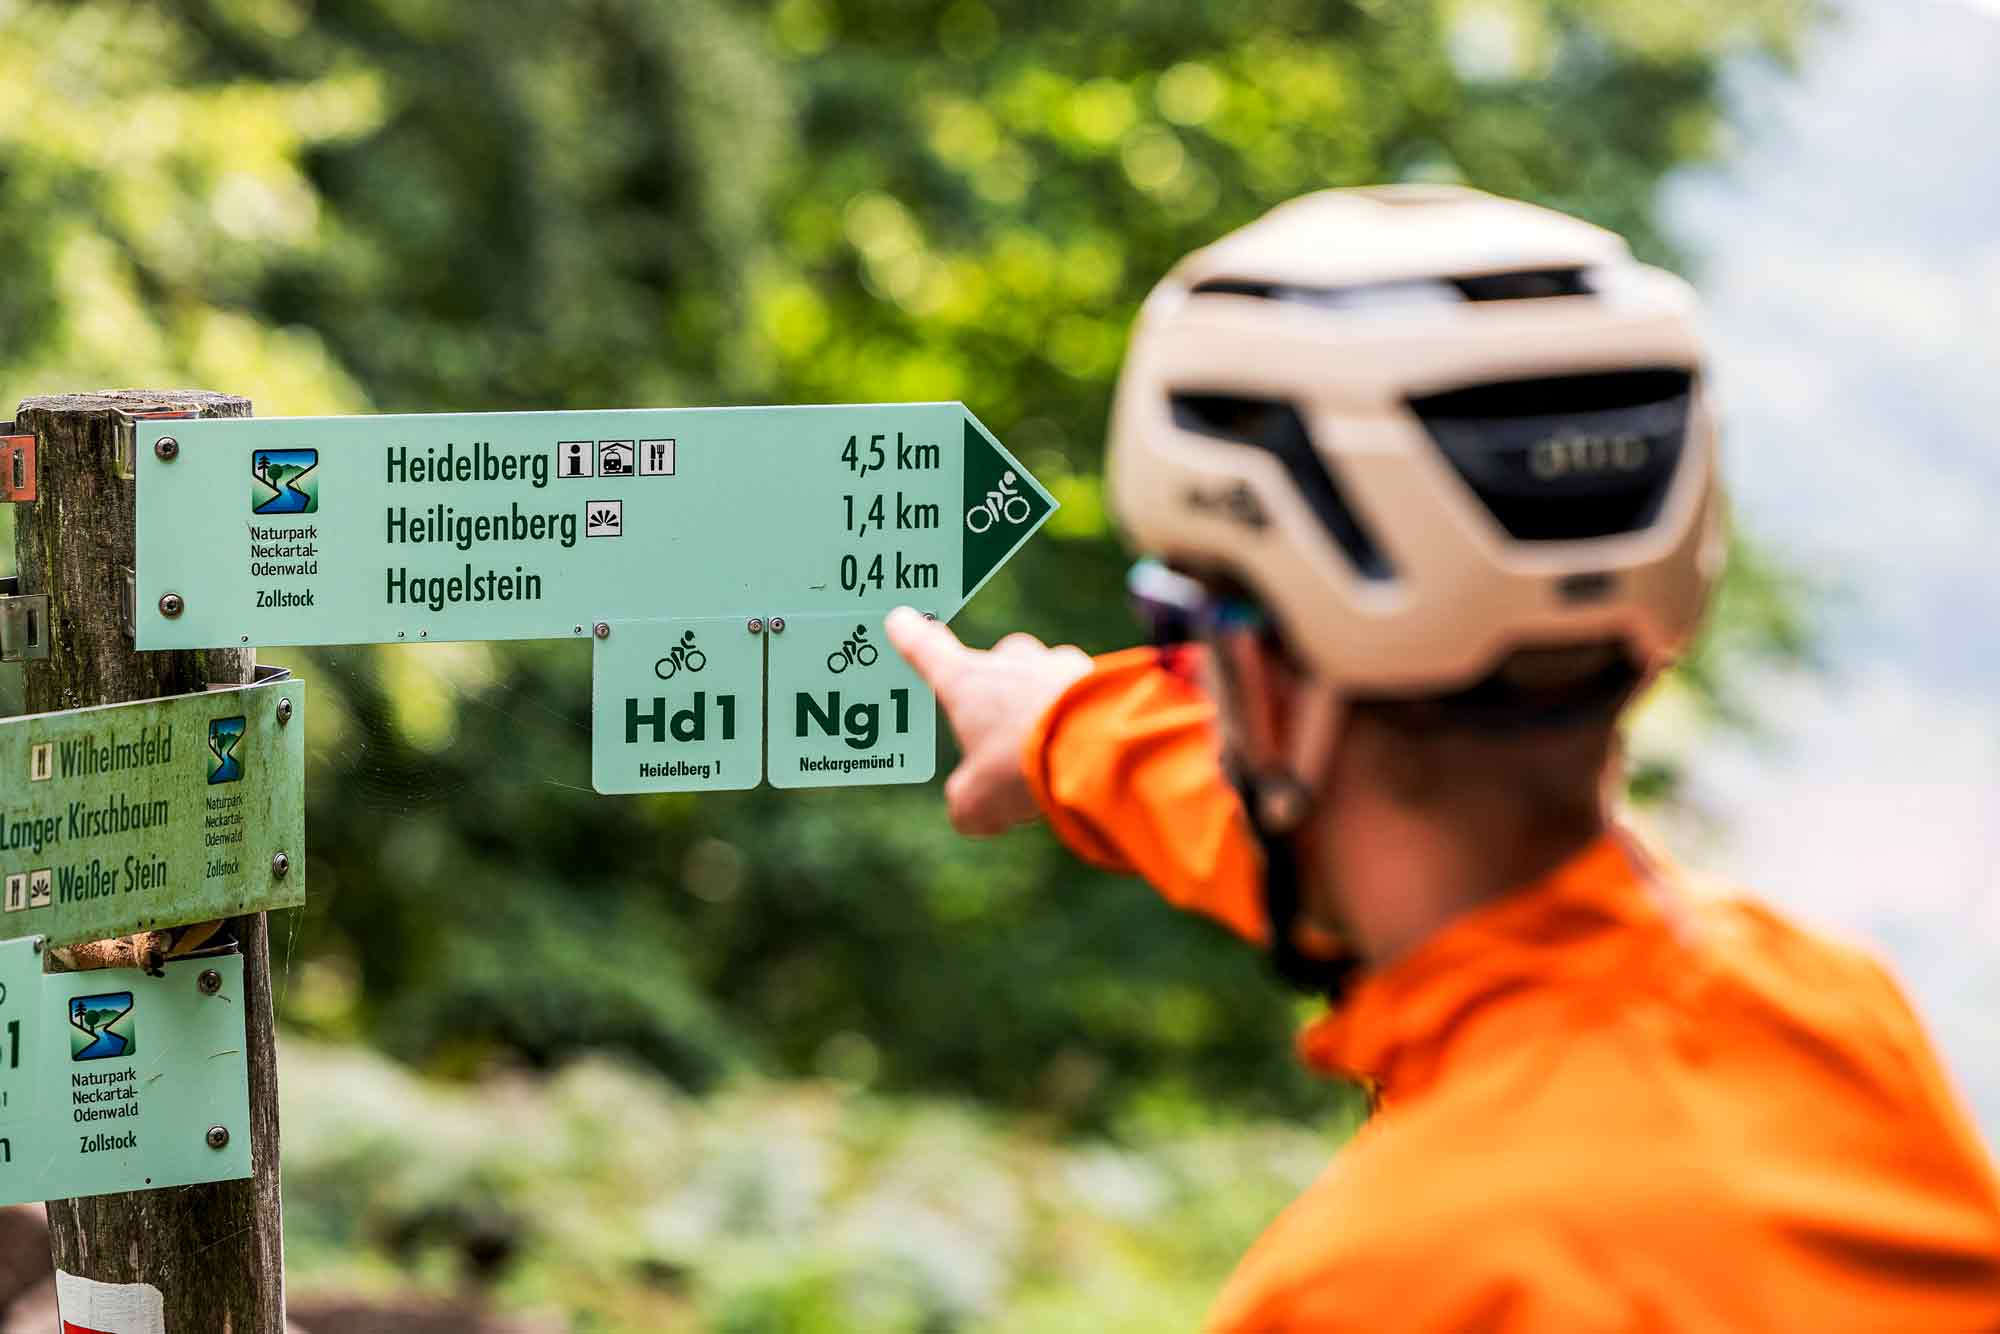 That's the way to go! Thanks to the good signposting of many cycling and hiking routes through the odenwald, it is easy to find your way around when bikepacking in the odenwald, even without a gps.